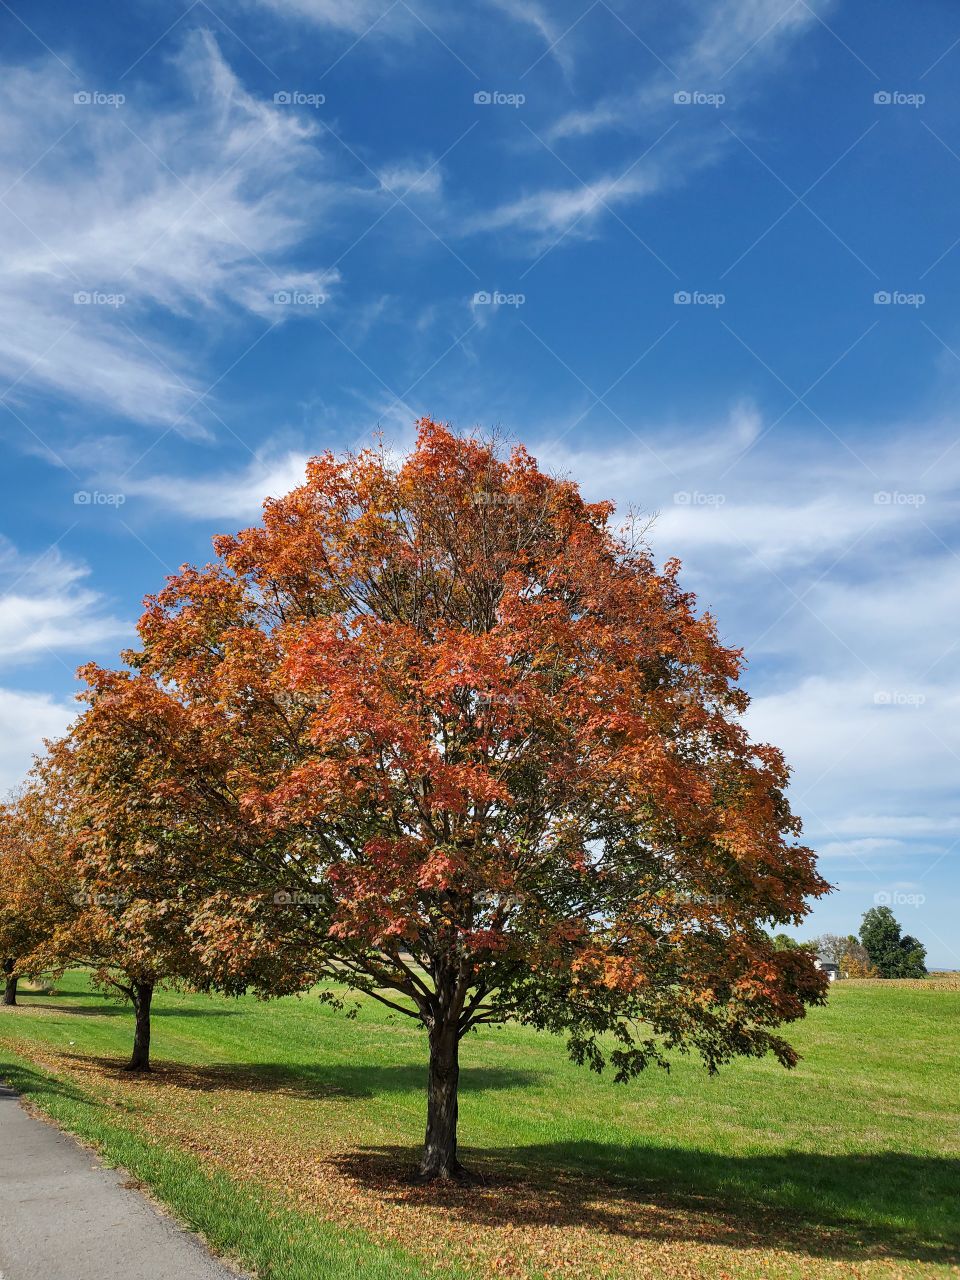 Large Tree with Brown Foliage